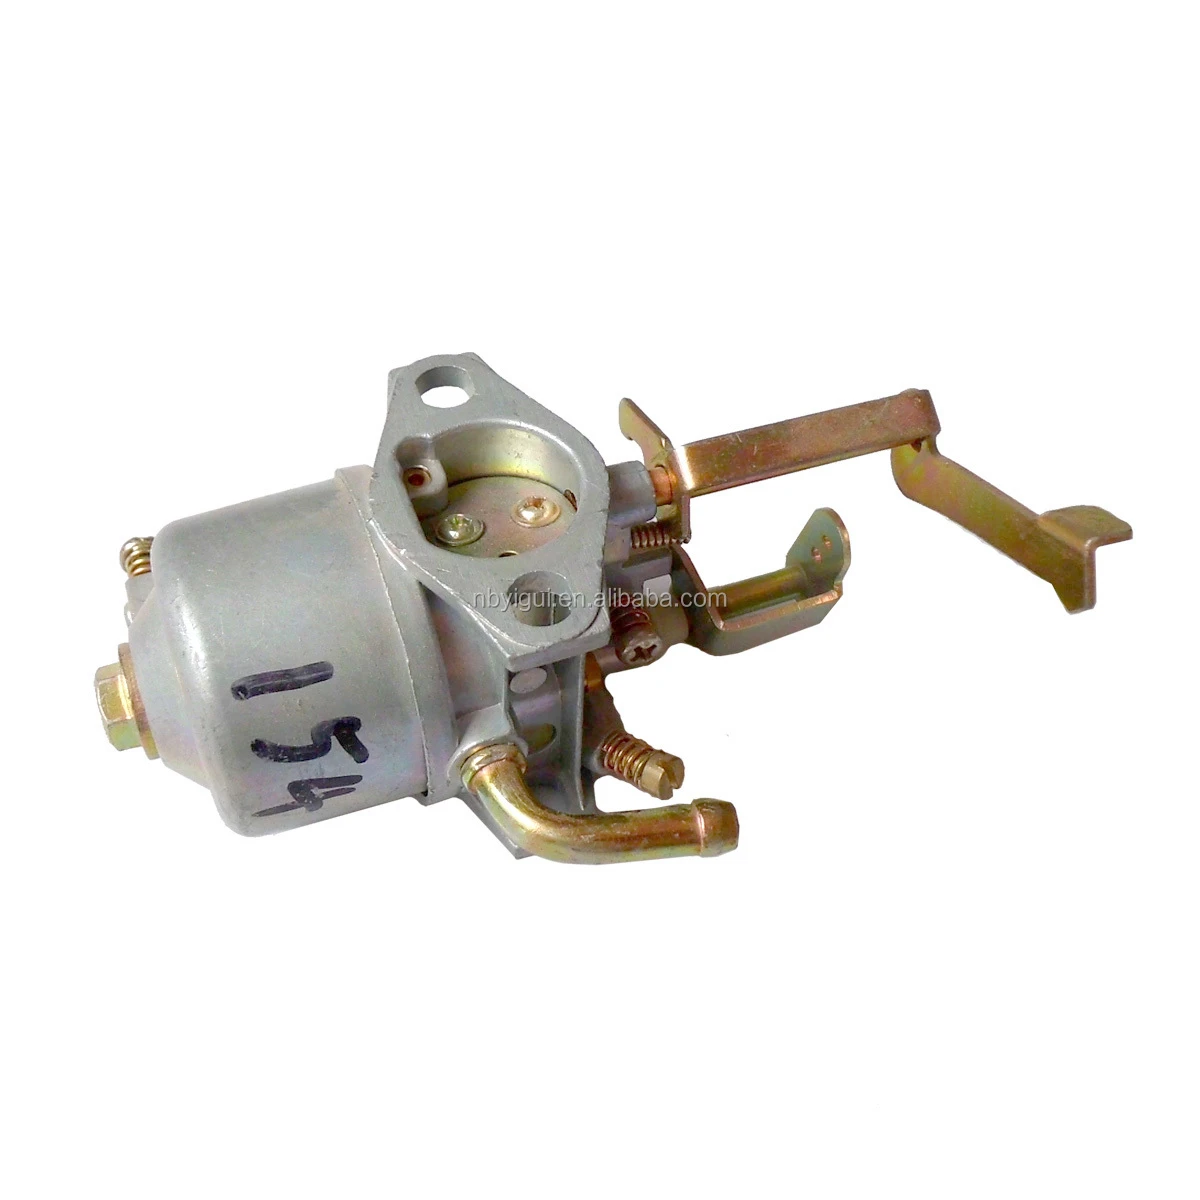 Hot sell  154 carburetor 154 good quality  competitive price gasoline generator  parts